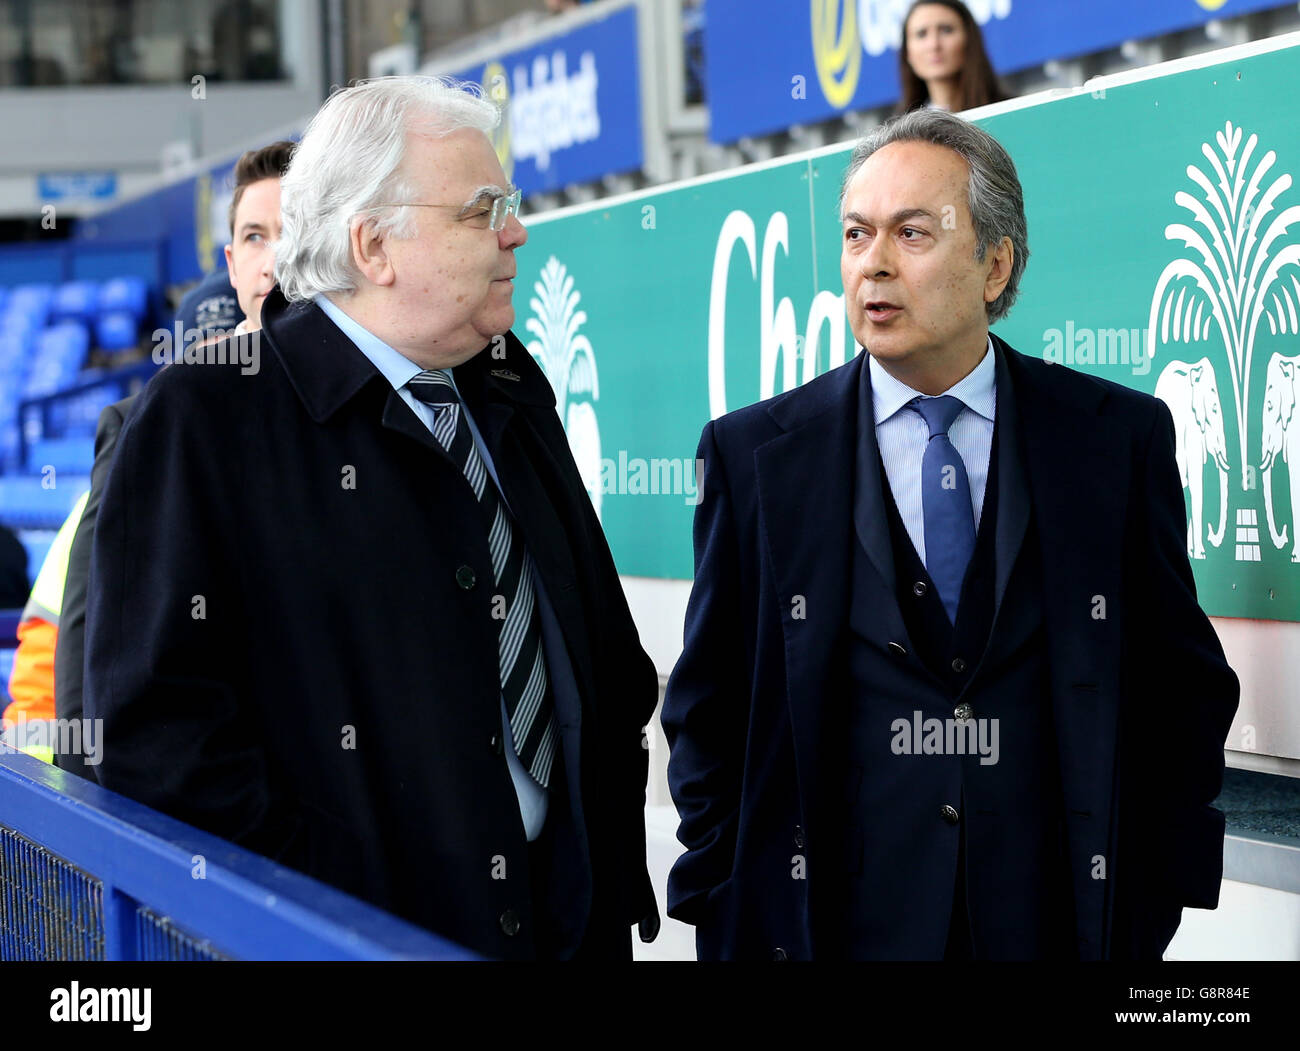 New Everton owner Farhad Moshiri with Bill Kenwright (left) before the Emirates FA Cup, Quarter Final match at Goodison Park, Liverpool. Stock Photo